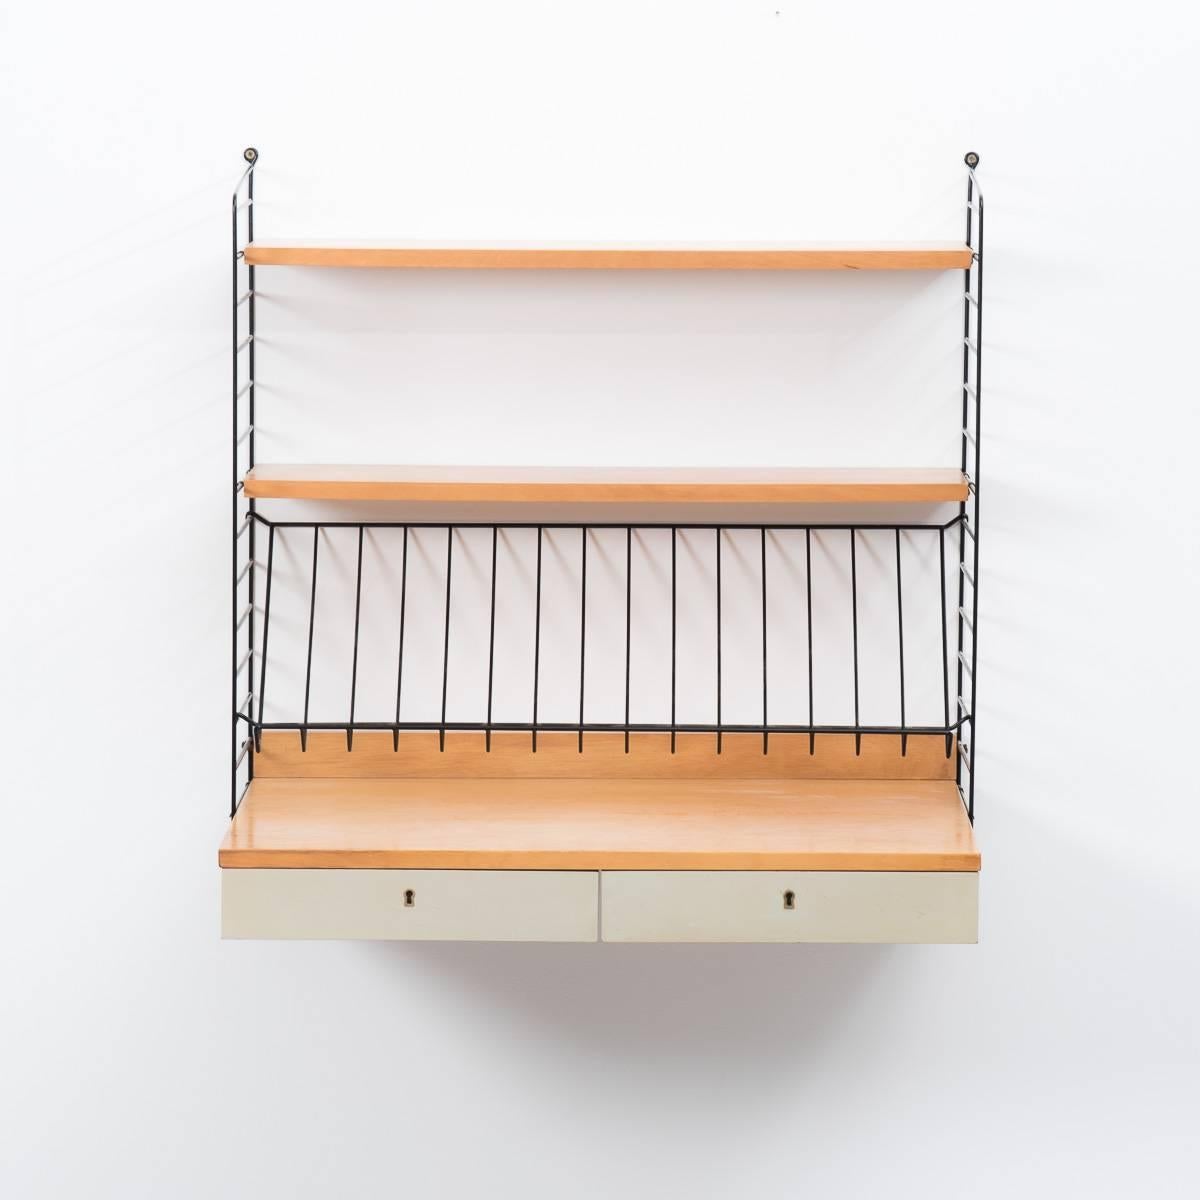 Designed in the early 1950s and still in production today the string system is the most iconic Scandinavian shelving system. This incredibly rare is the only example we have ever seen and has birch ply surfaces which contrast beautifully with the